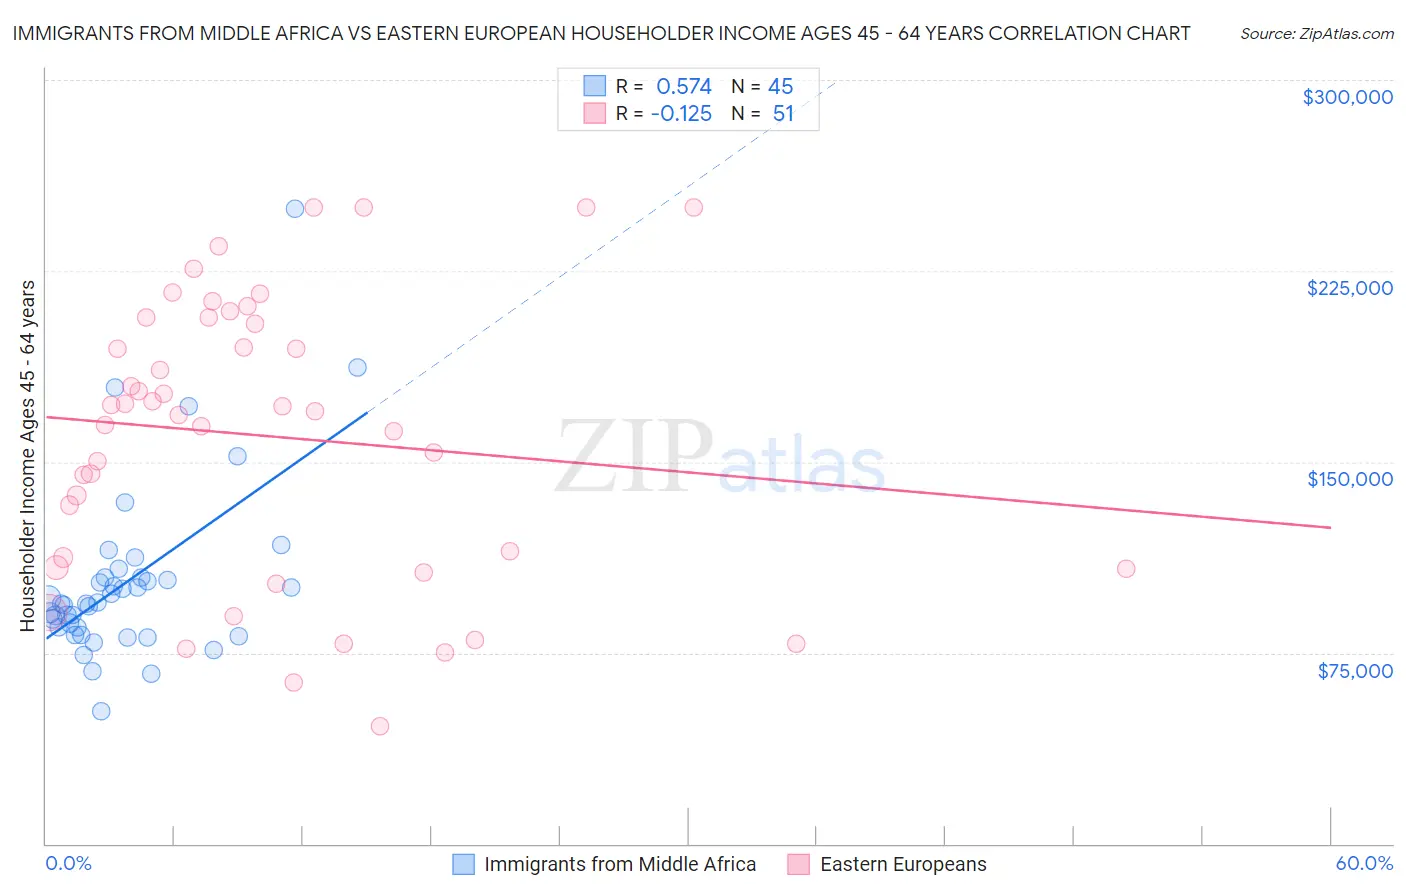 Immigrants from Middle Africa vs Eastern European Householder Income Ages 45 - 64 years